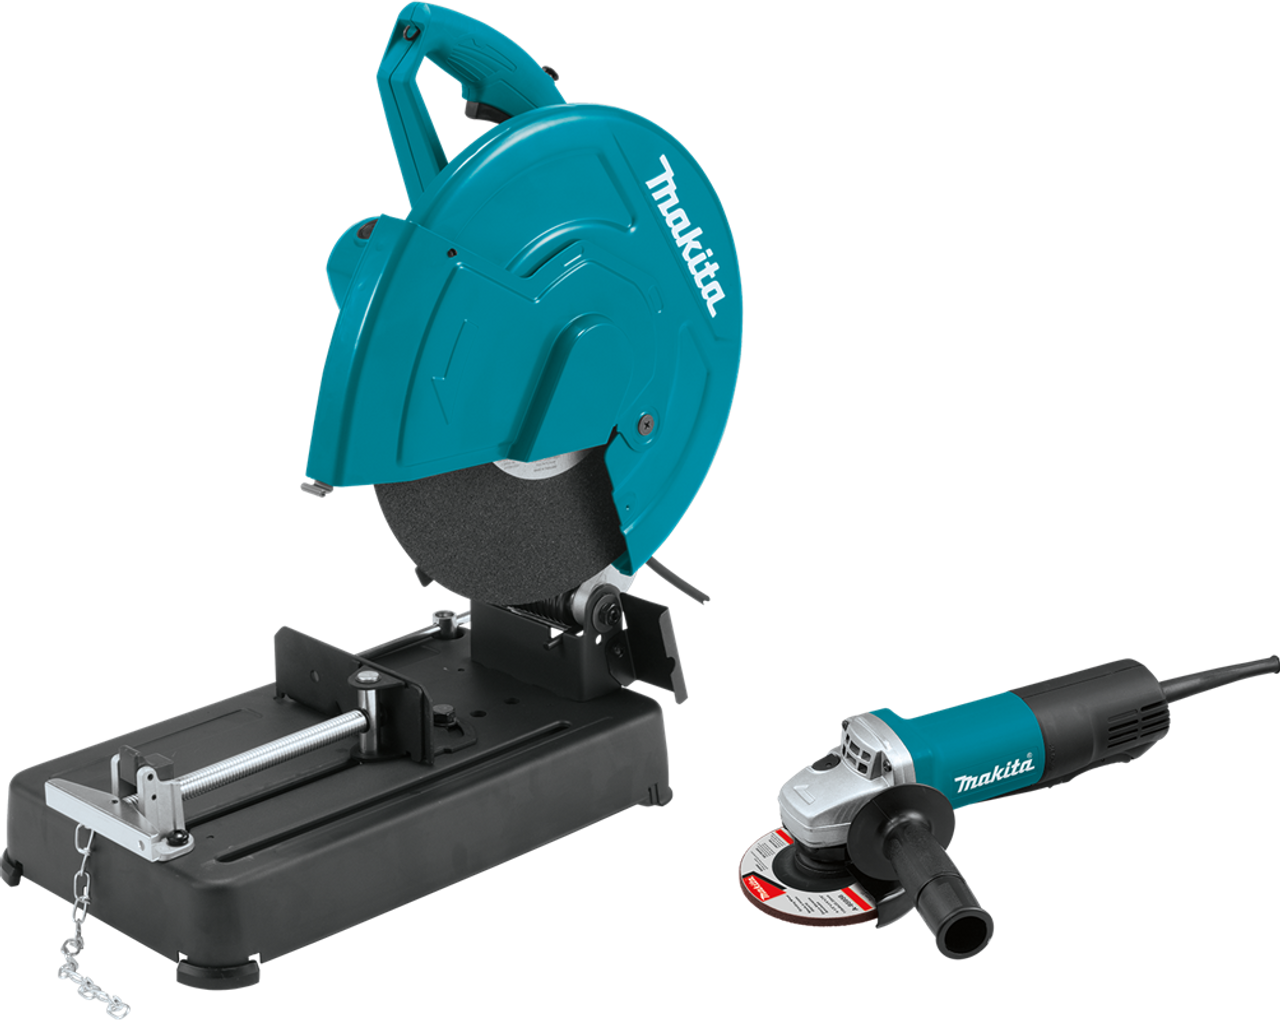 14" Cut-Off Saw with 4-1/2" Paddle Switch Angle Grinder, Large cutting capacity, LW1401X2